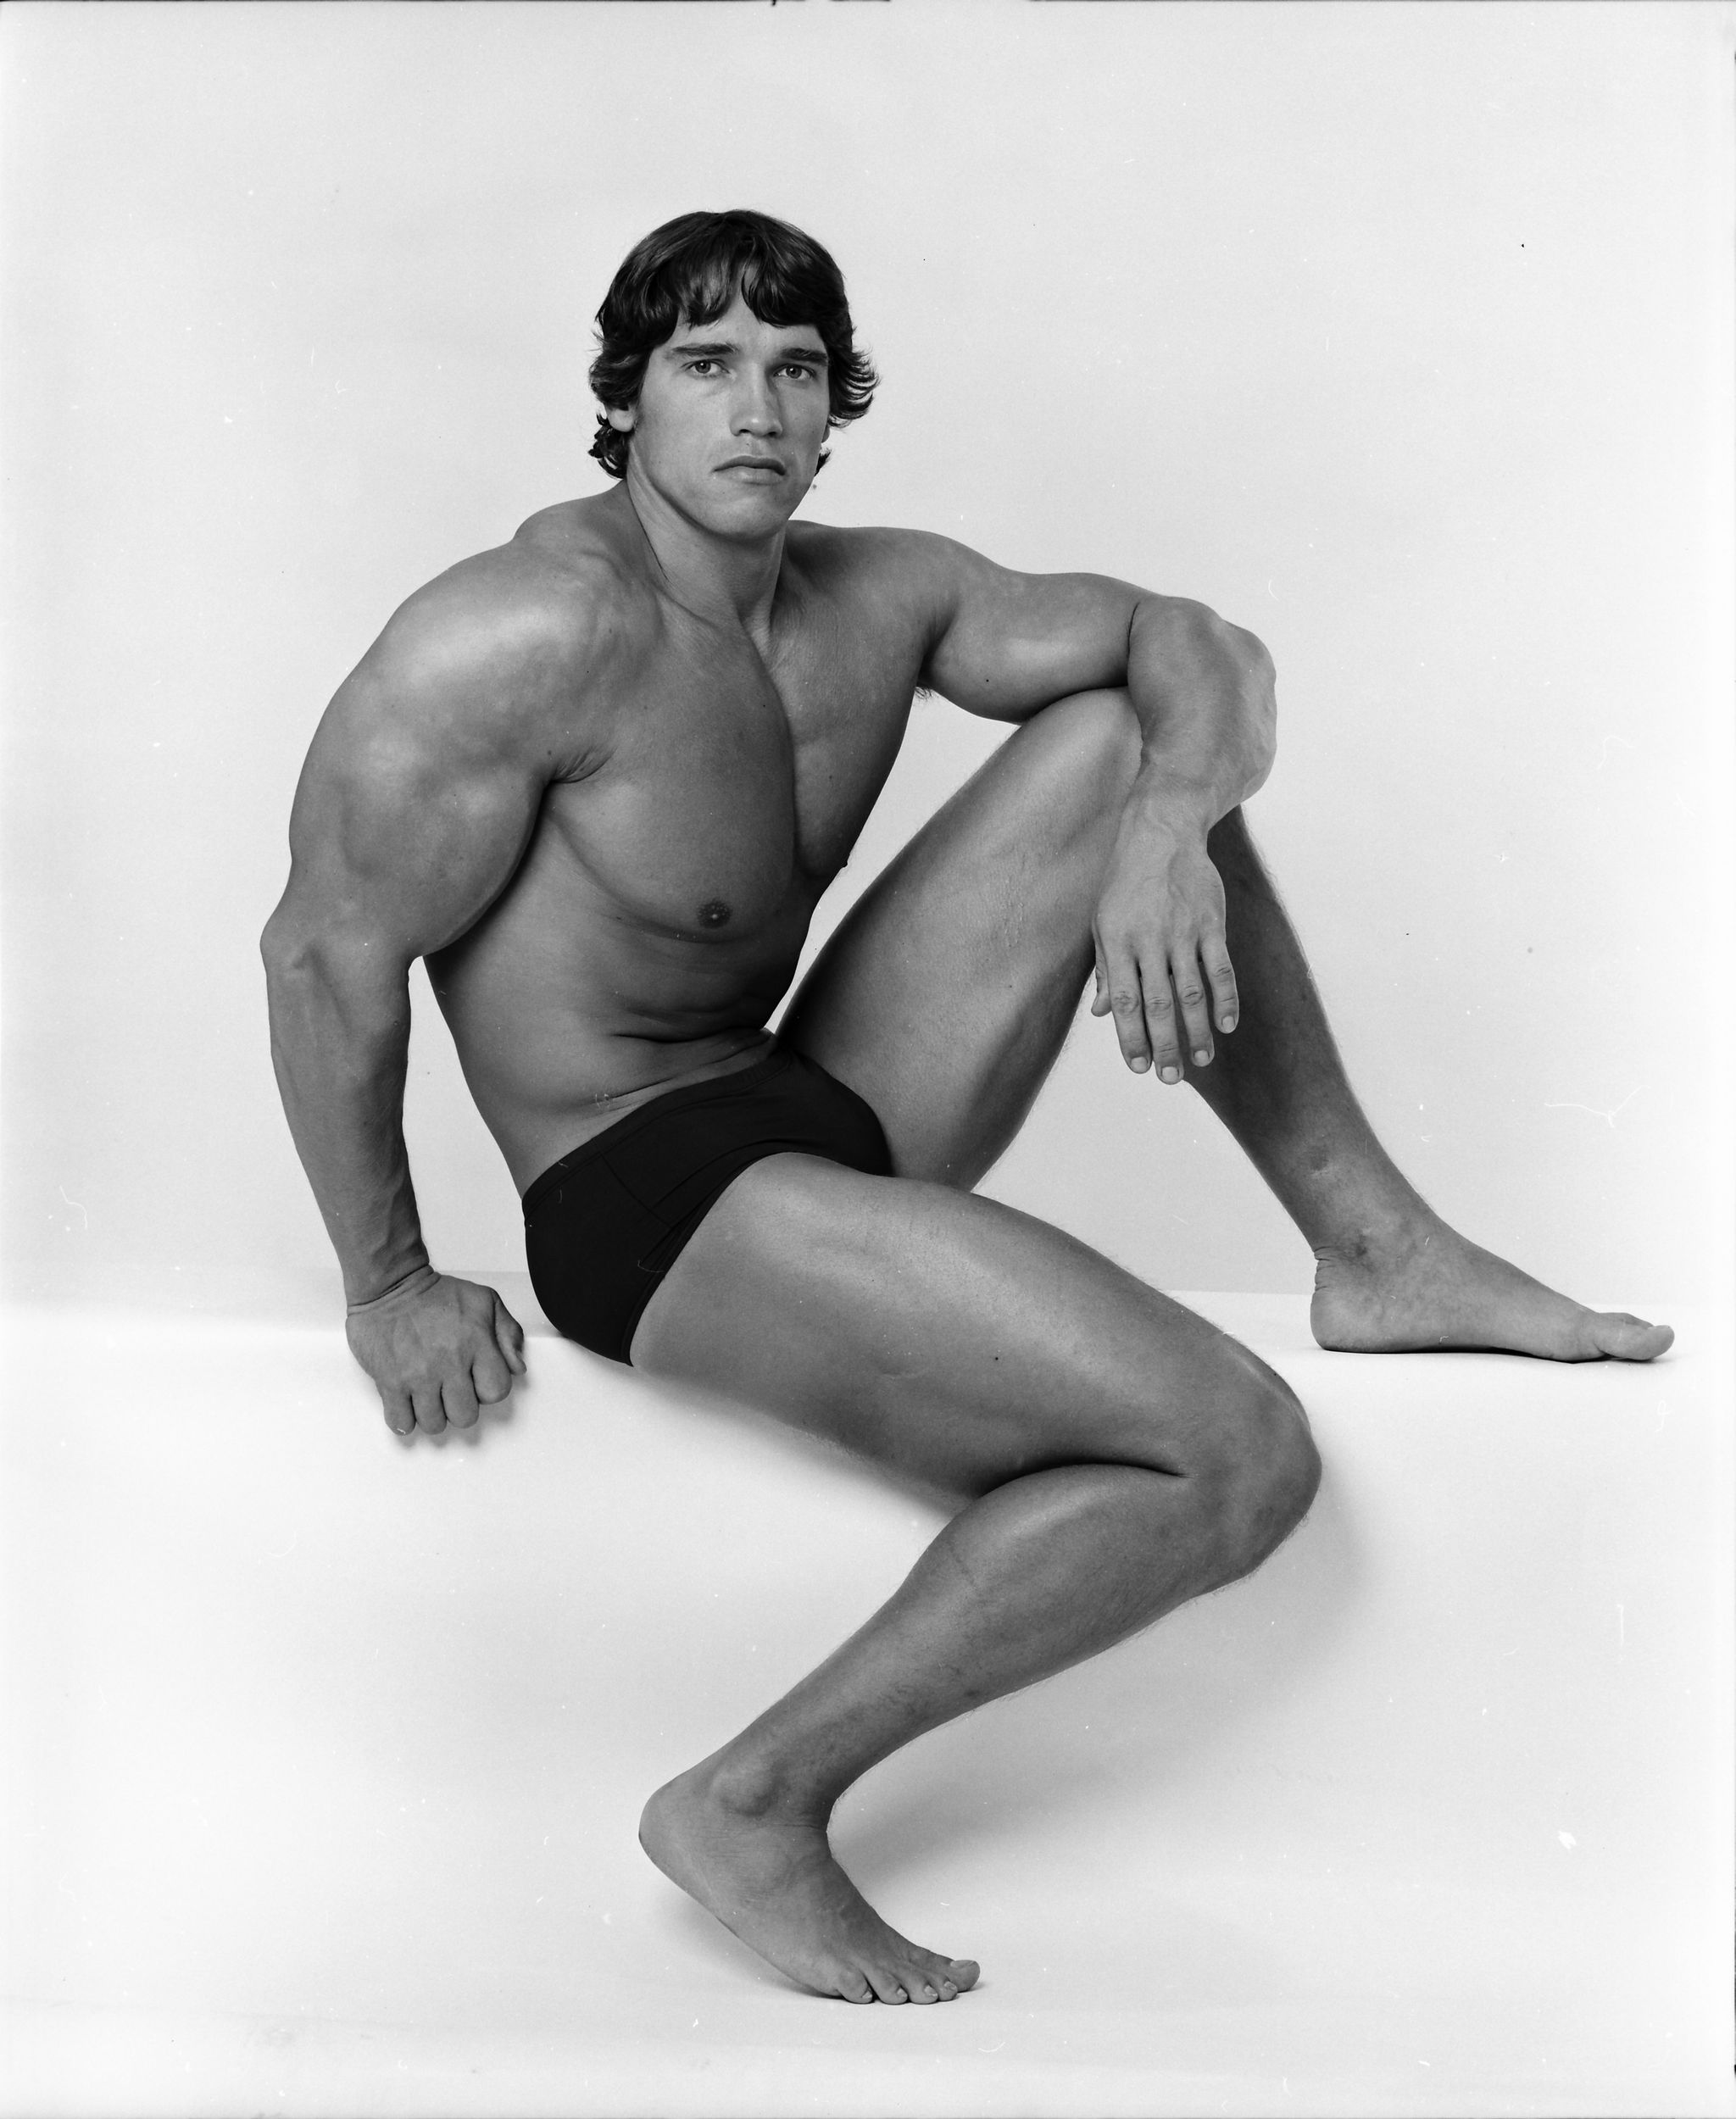 professional bodybuilder arnold schwarzenegger posing at the top of his form in october 1976 photo by jack mitchellgetty images